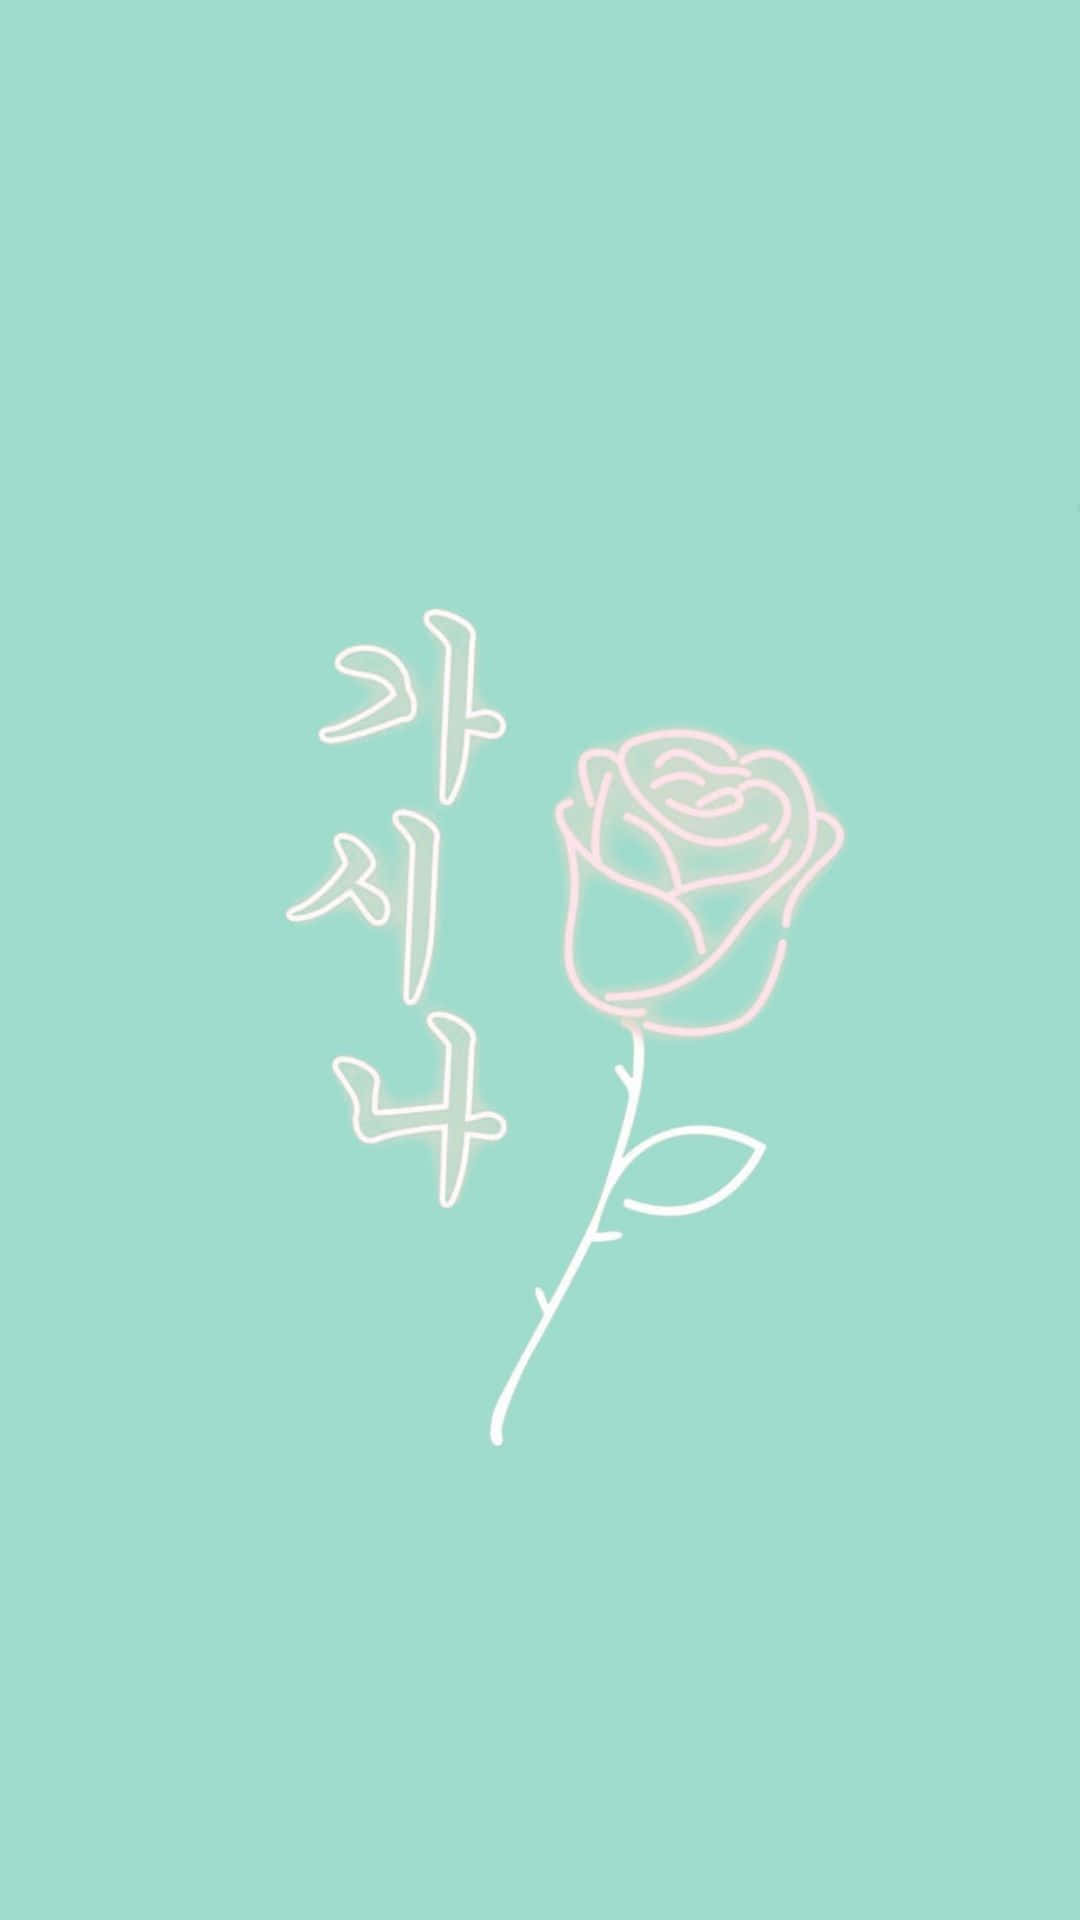 Line drawing of a rose with the word 'kpop' - Mint green, green, light green, pastel green